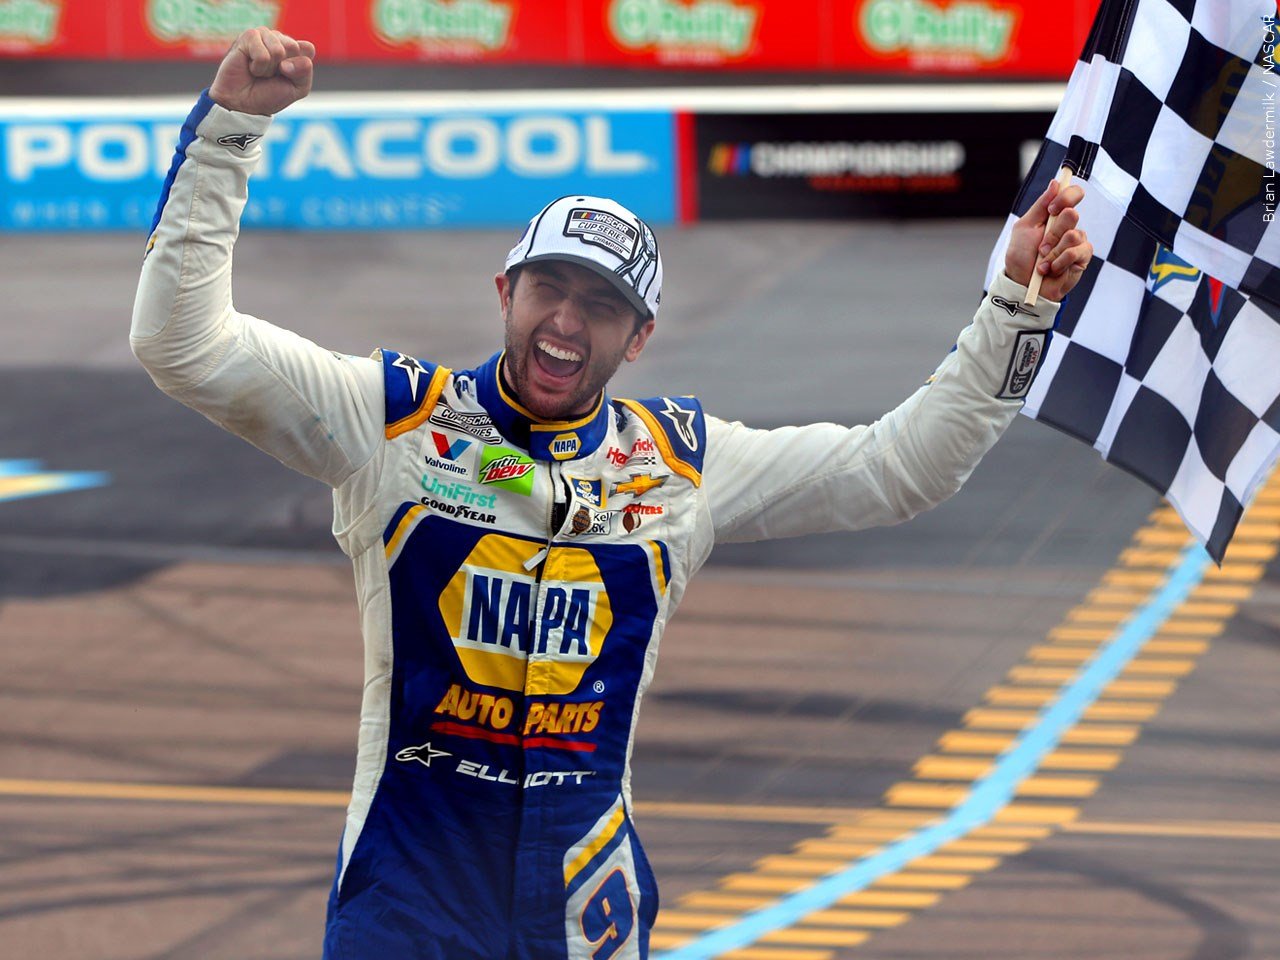 NASCAR driver Chase Elliott to appear at grand opening of NAPA Auto Parts Store